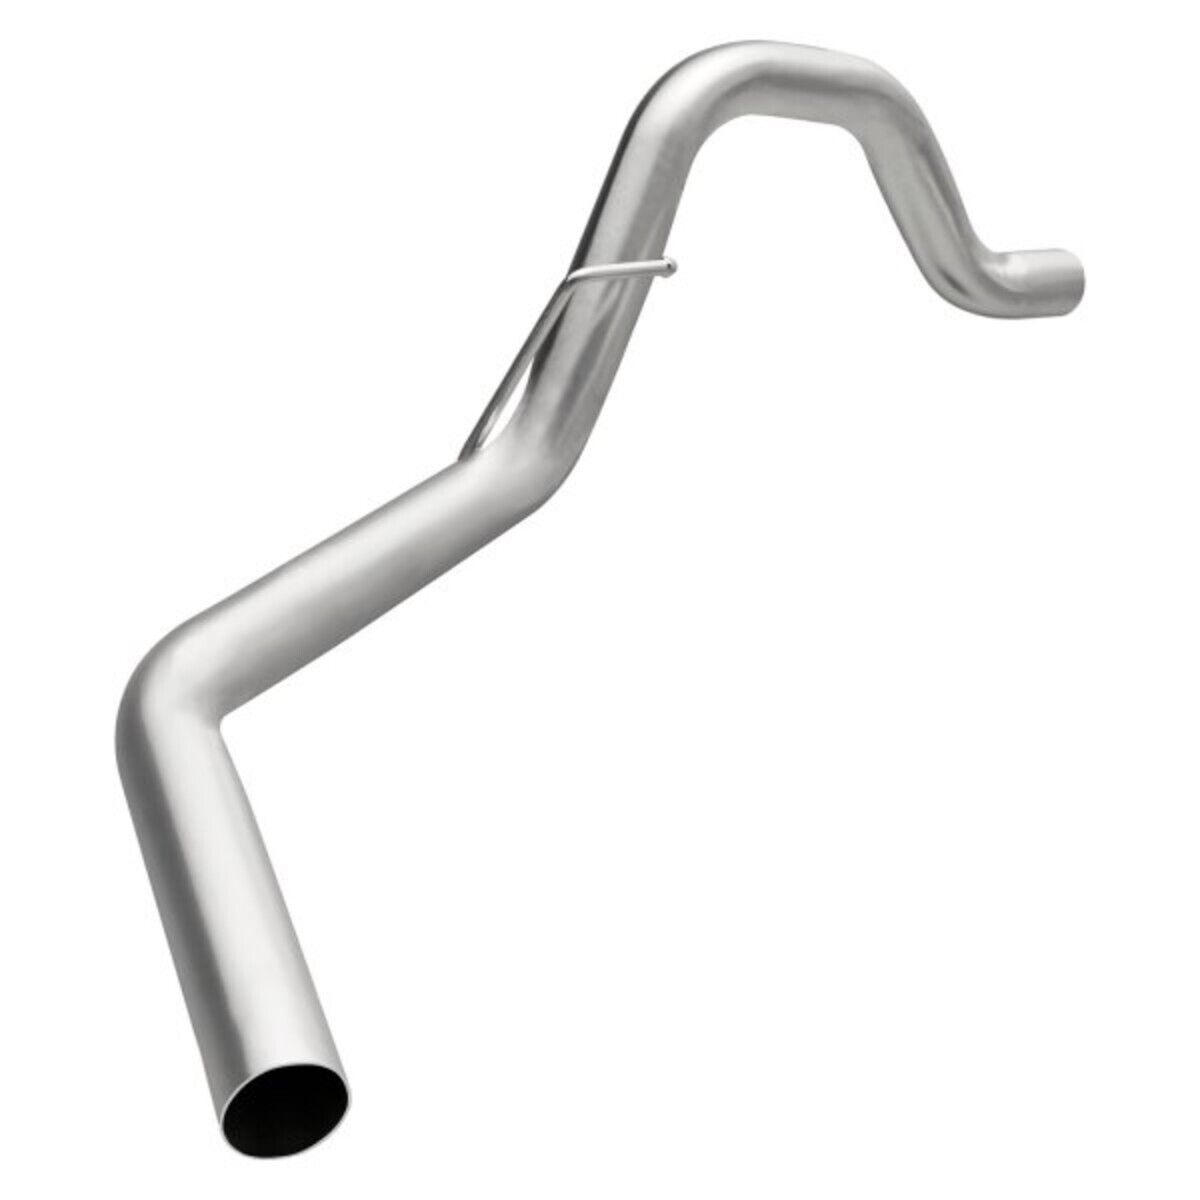 102-7937 BRExhaust Tail Pipe for F150 Truck Ford F-150 Lincoln Mark LT 2006-2008